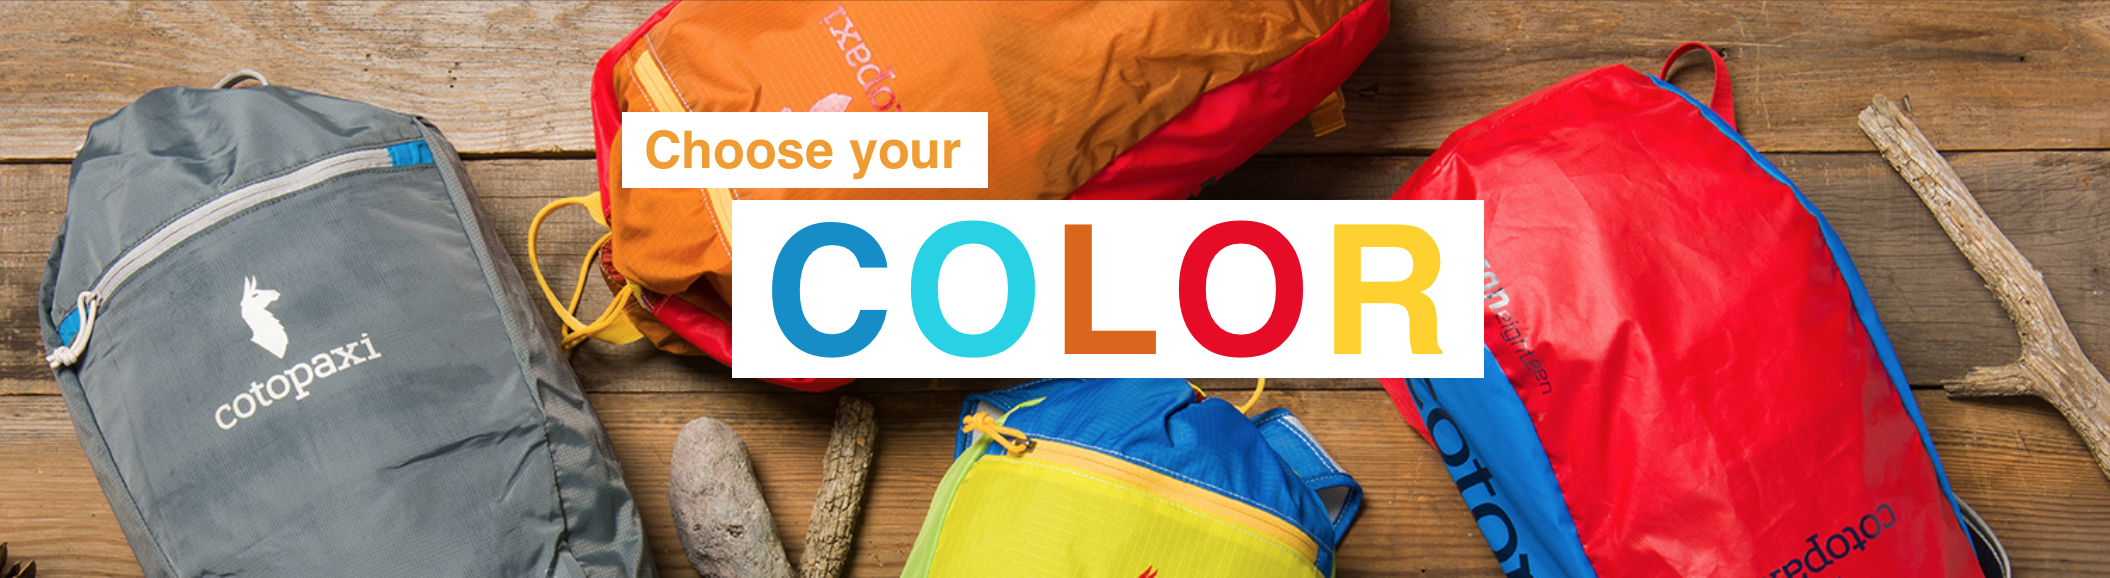 Cairn Coupon – Choose Your Daypack Color With Subscription!